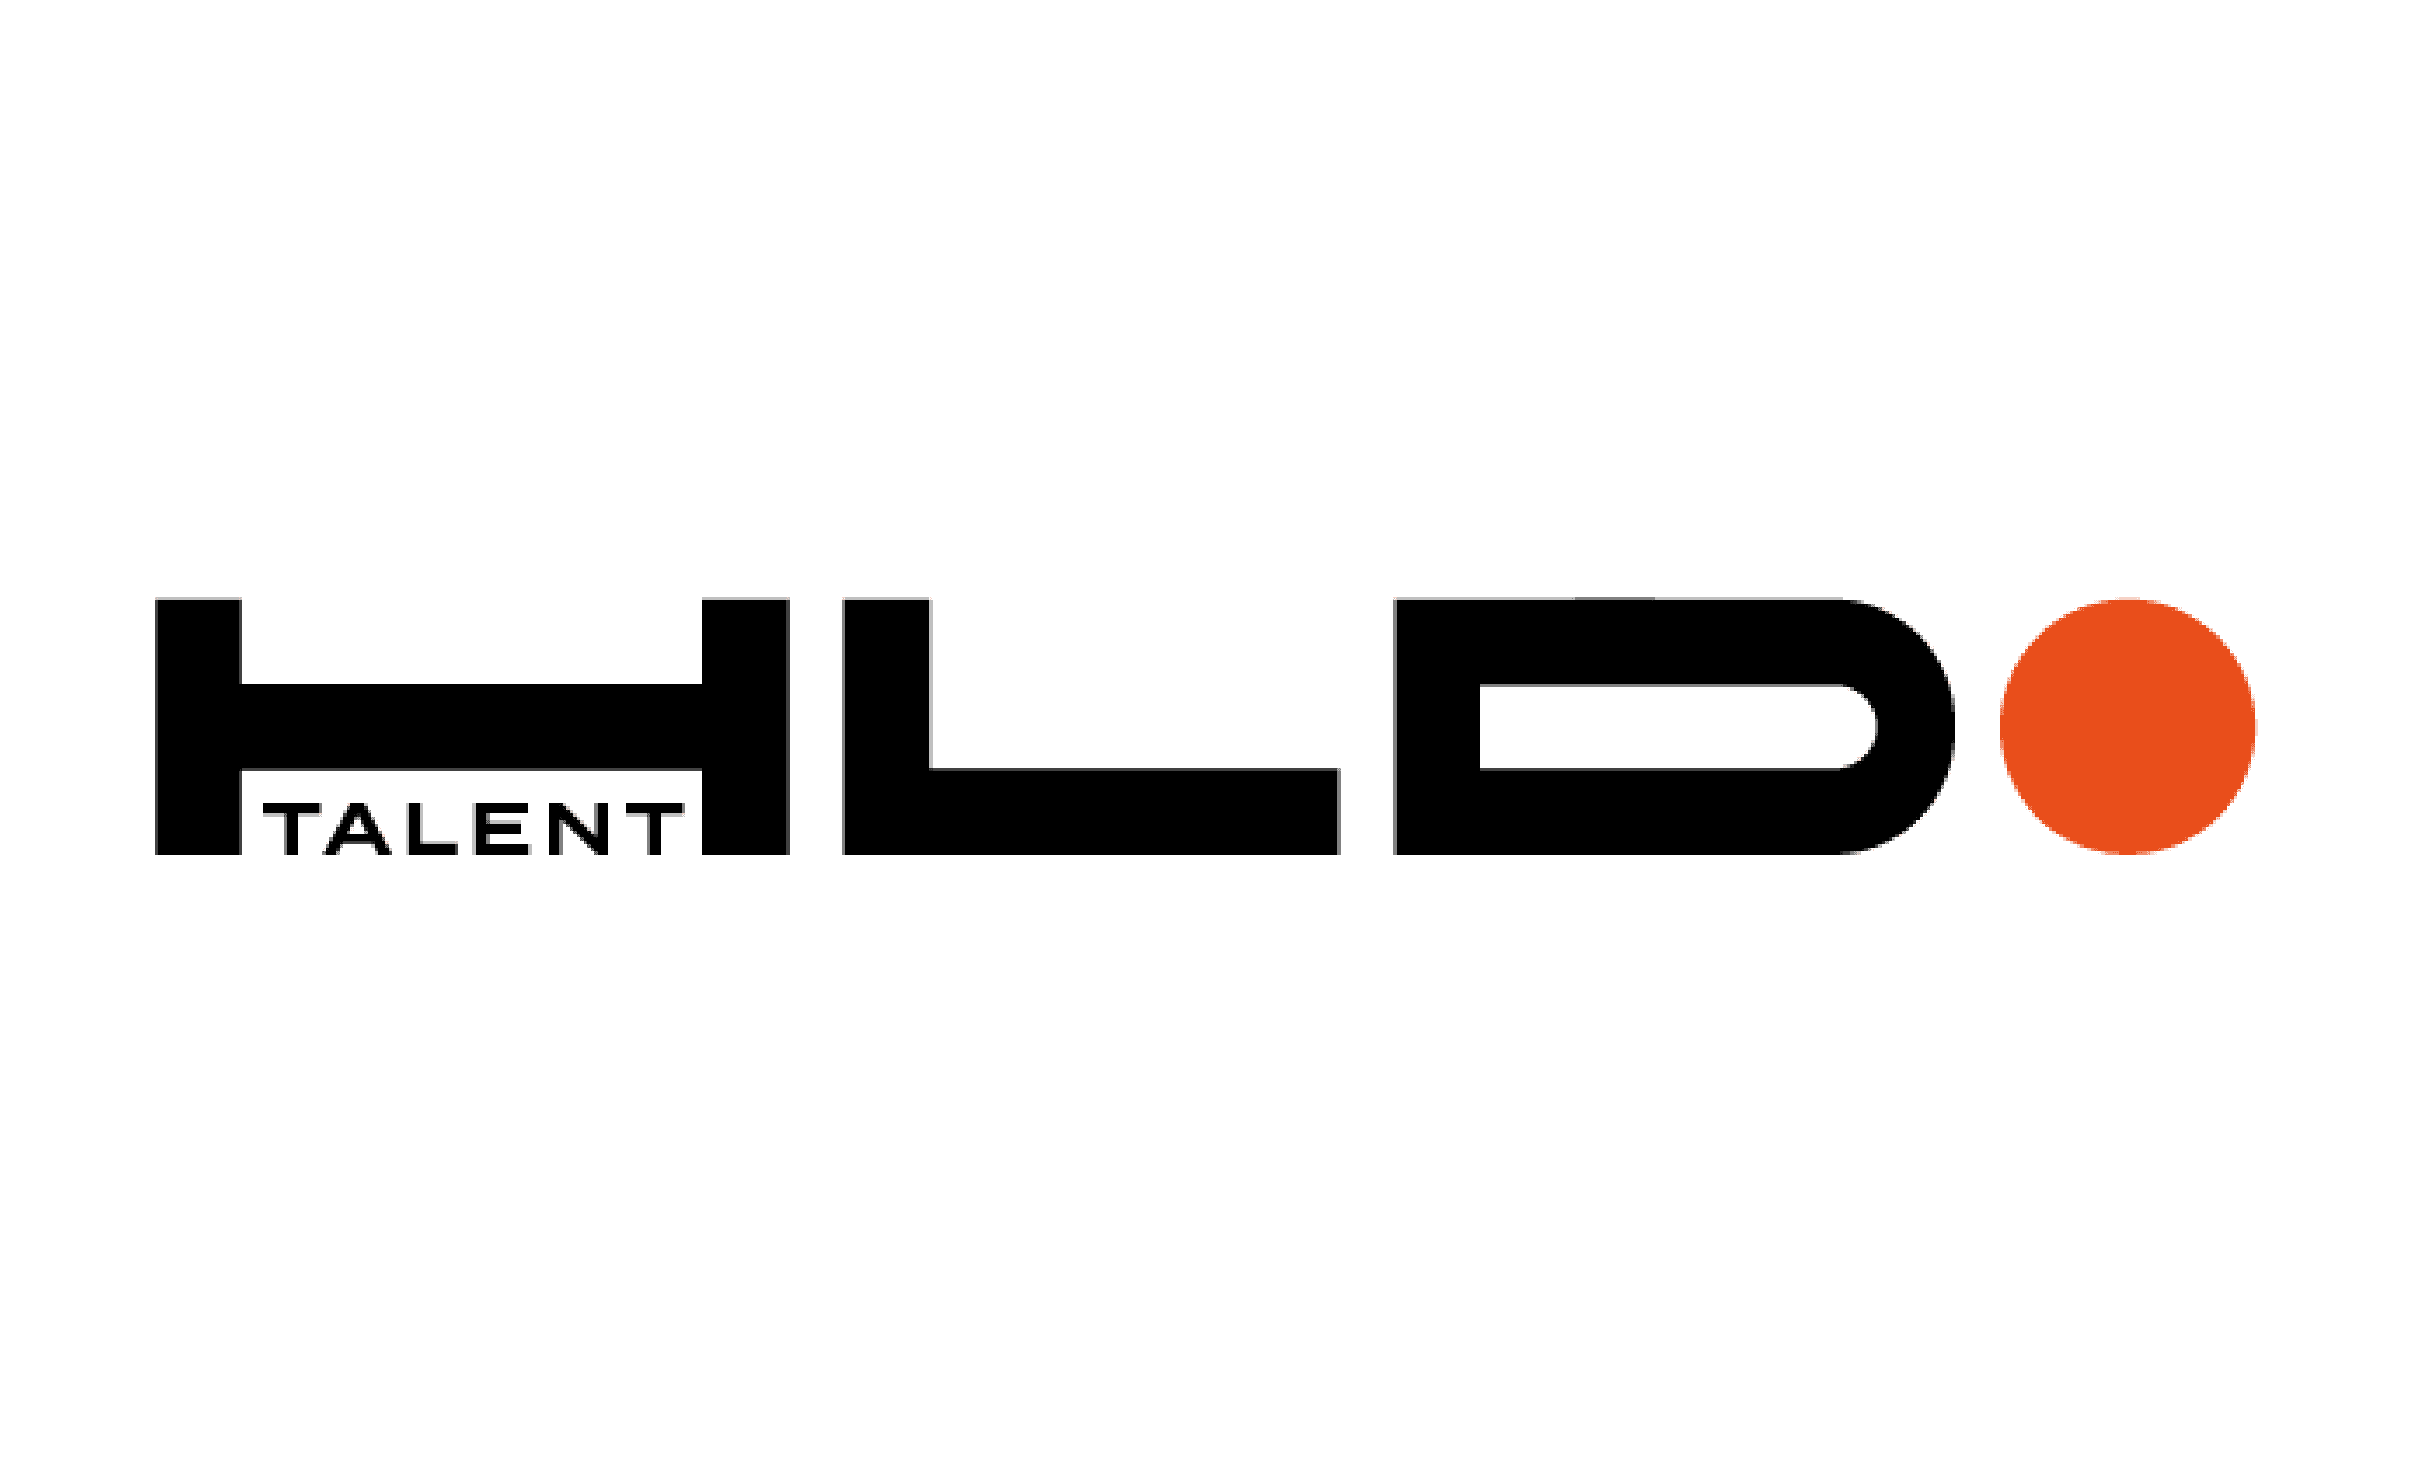 HLD – The branding that is sure to steal the spotlight